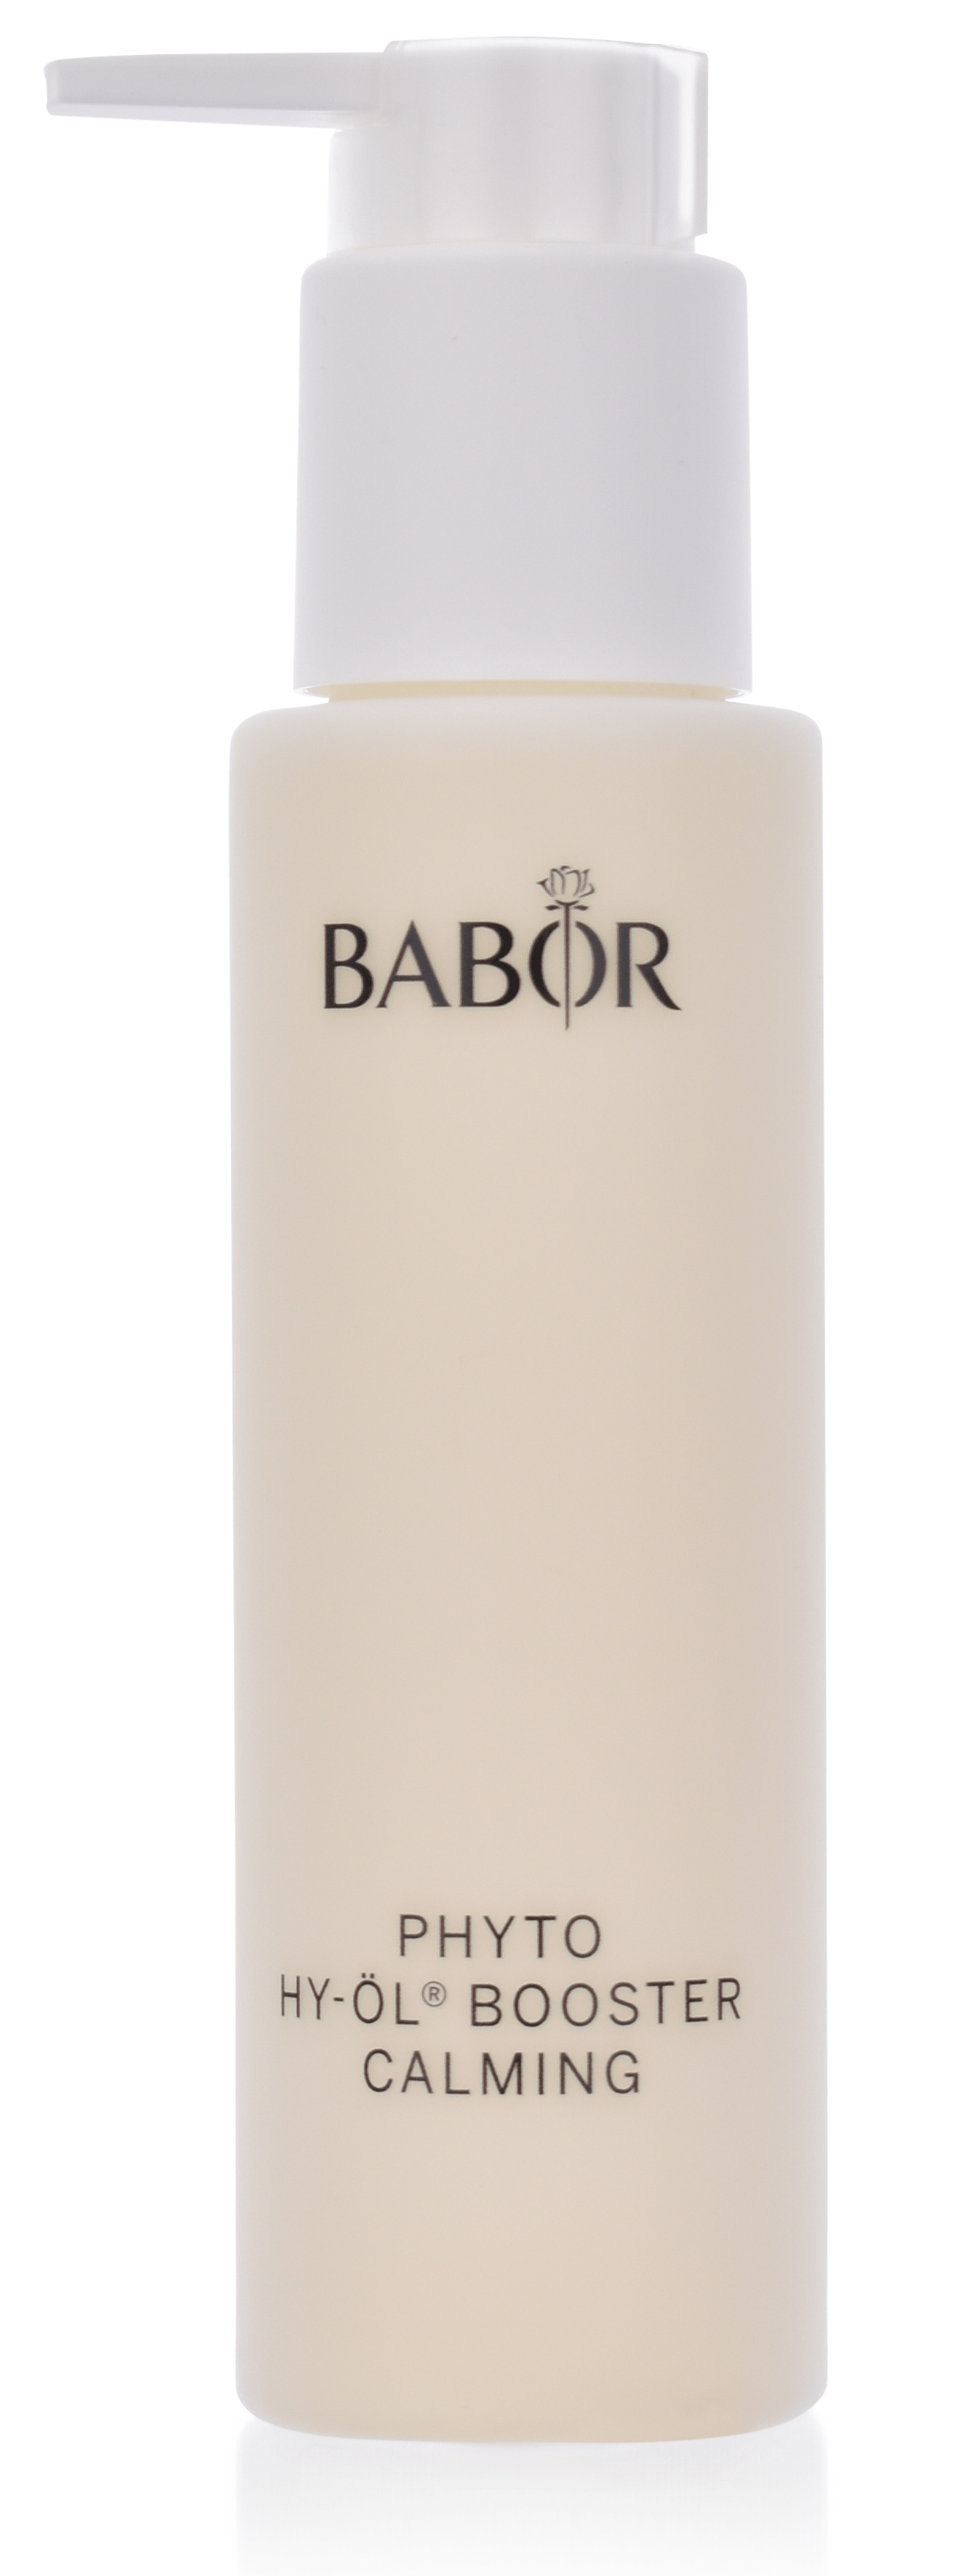 BABOR Cleansing - Phyto HY-ÖL Booster Calming 100 ml 